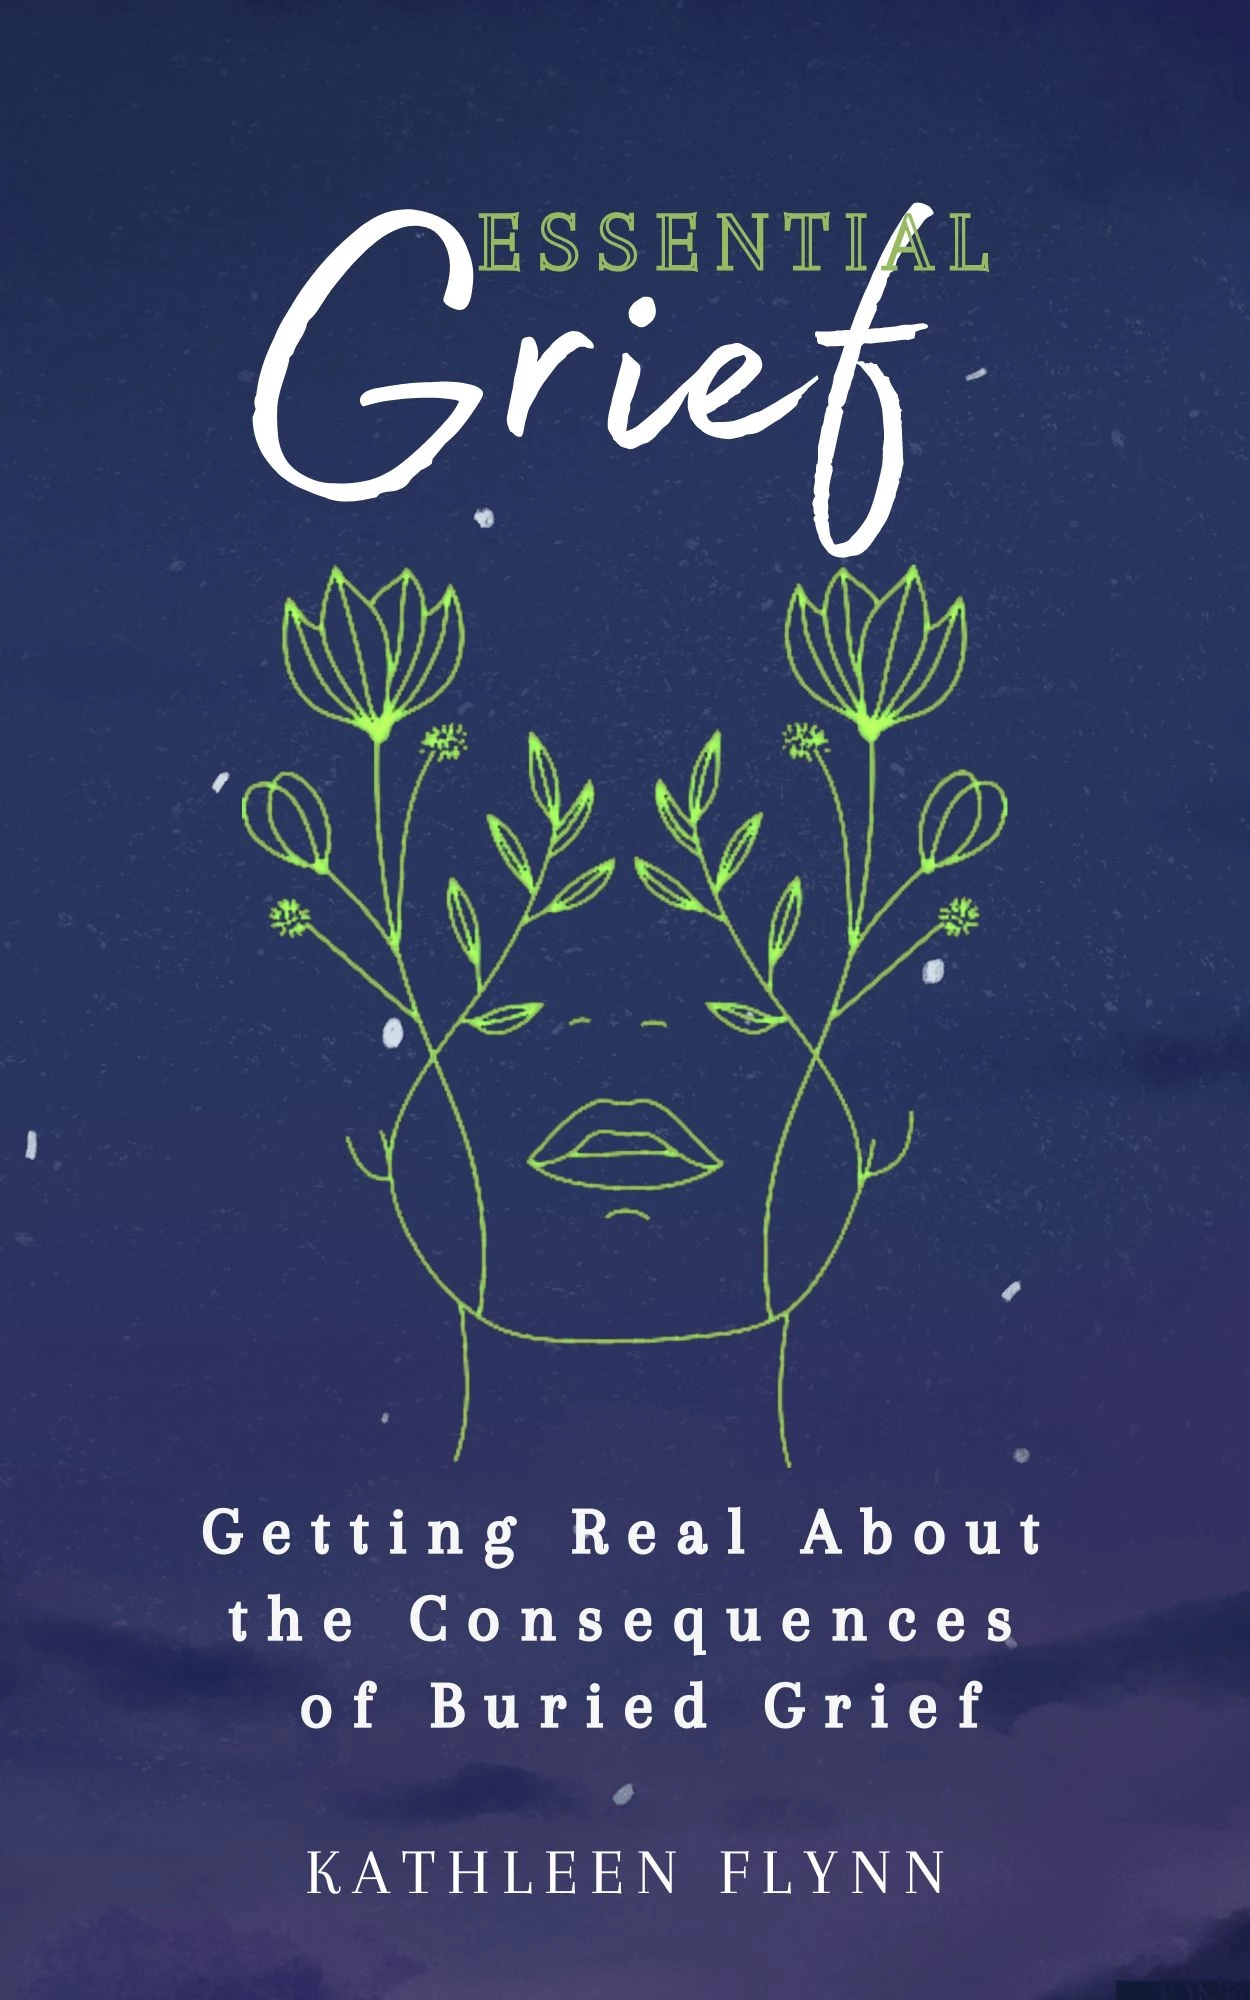 Essential Grief: Getting Real About the Consequences of Buried Grief